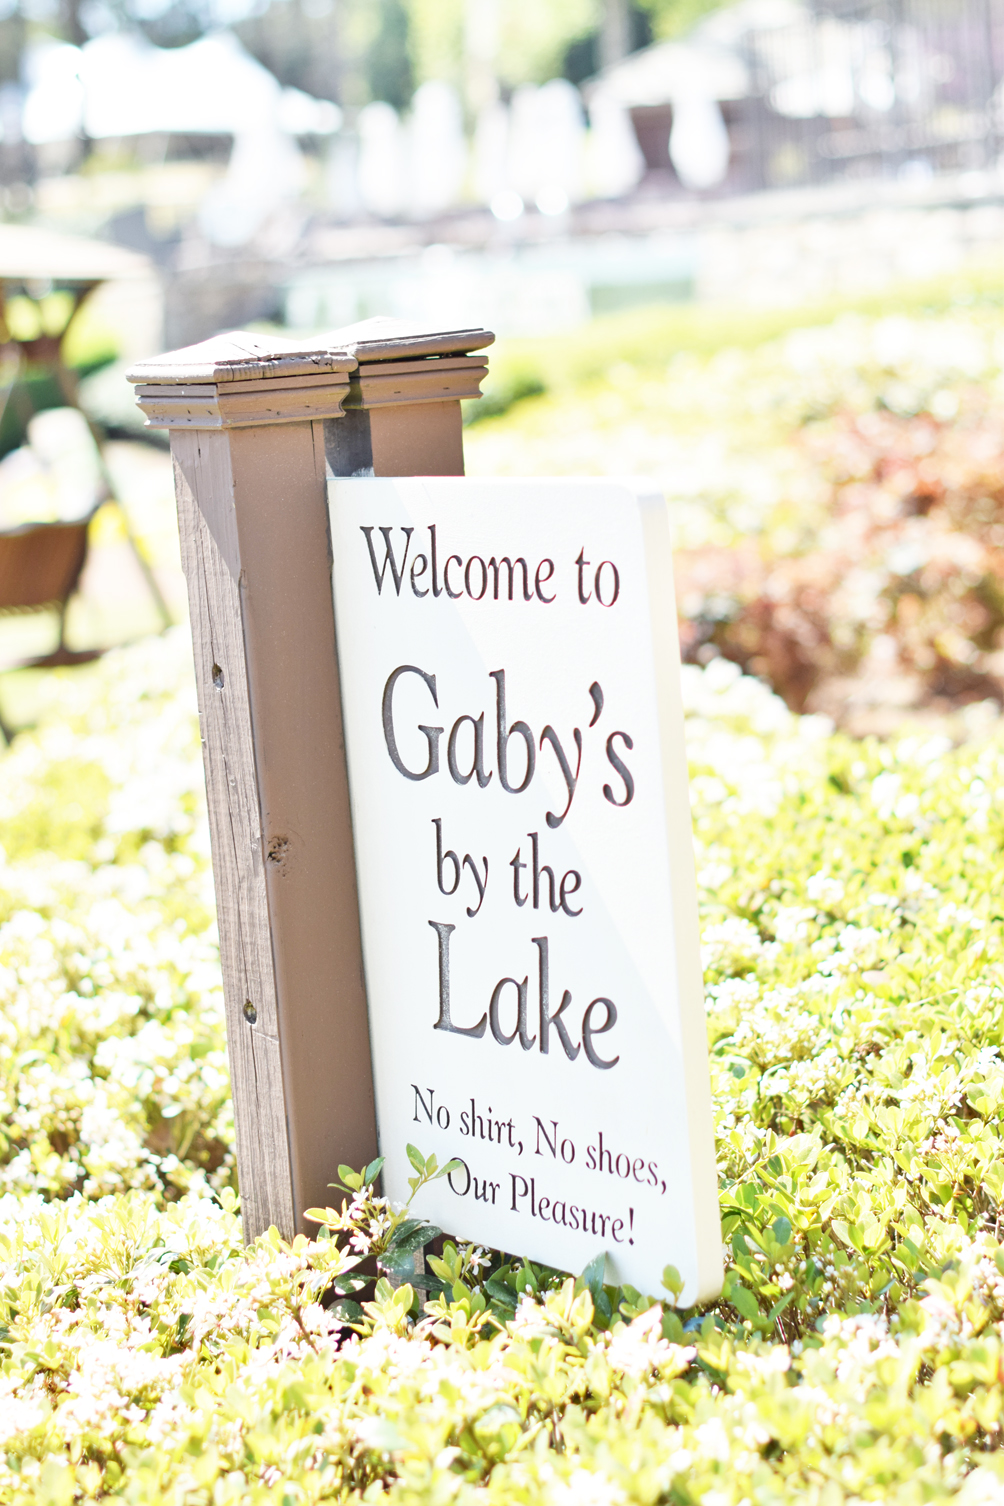 Gaby's by the Lake restaurant - one brass fox